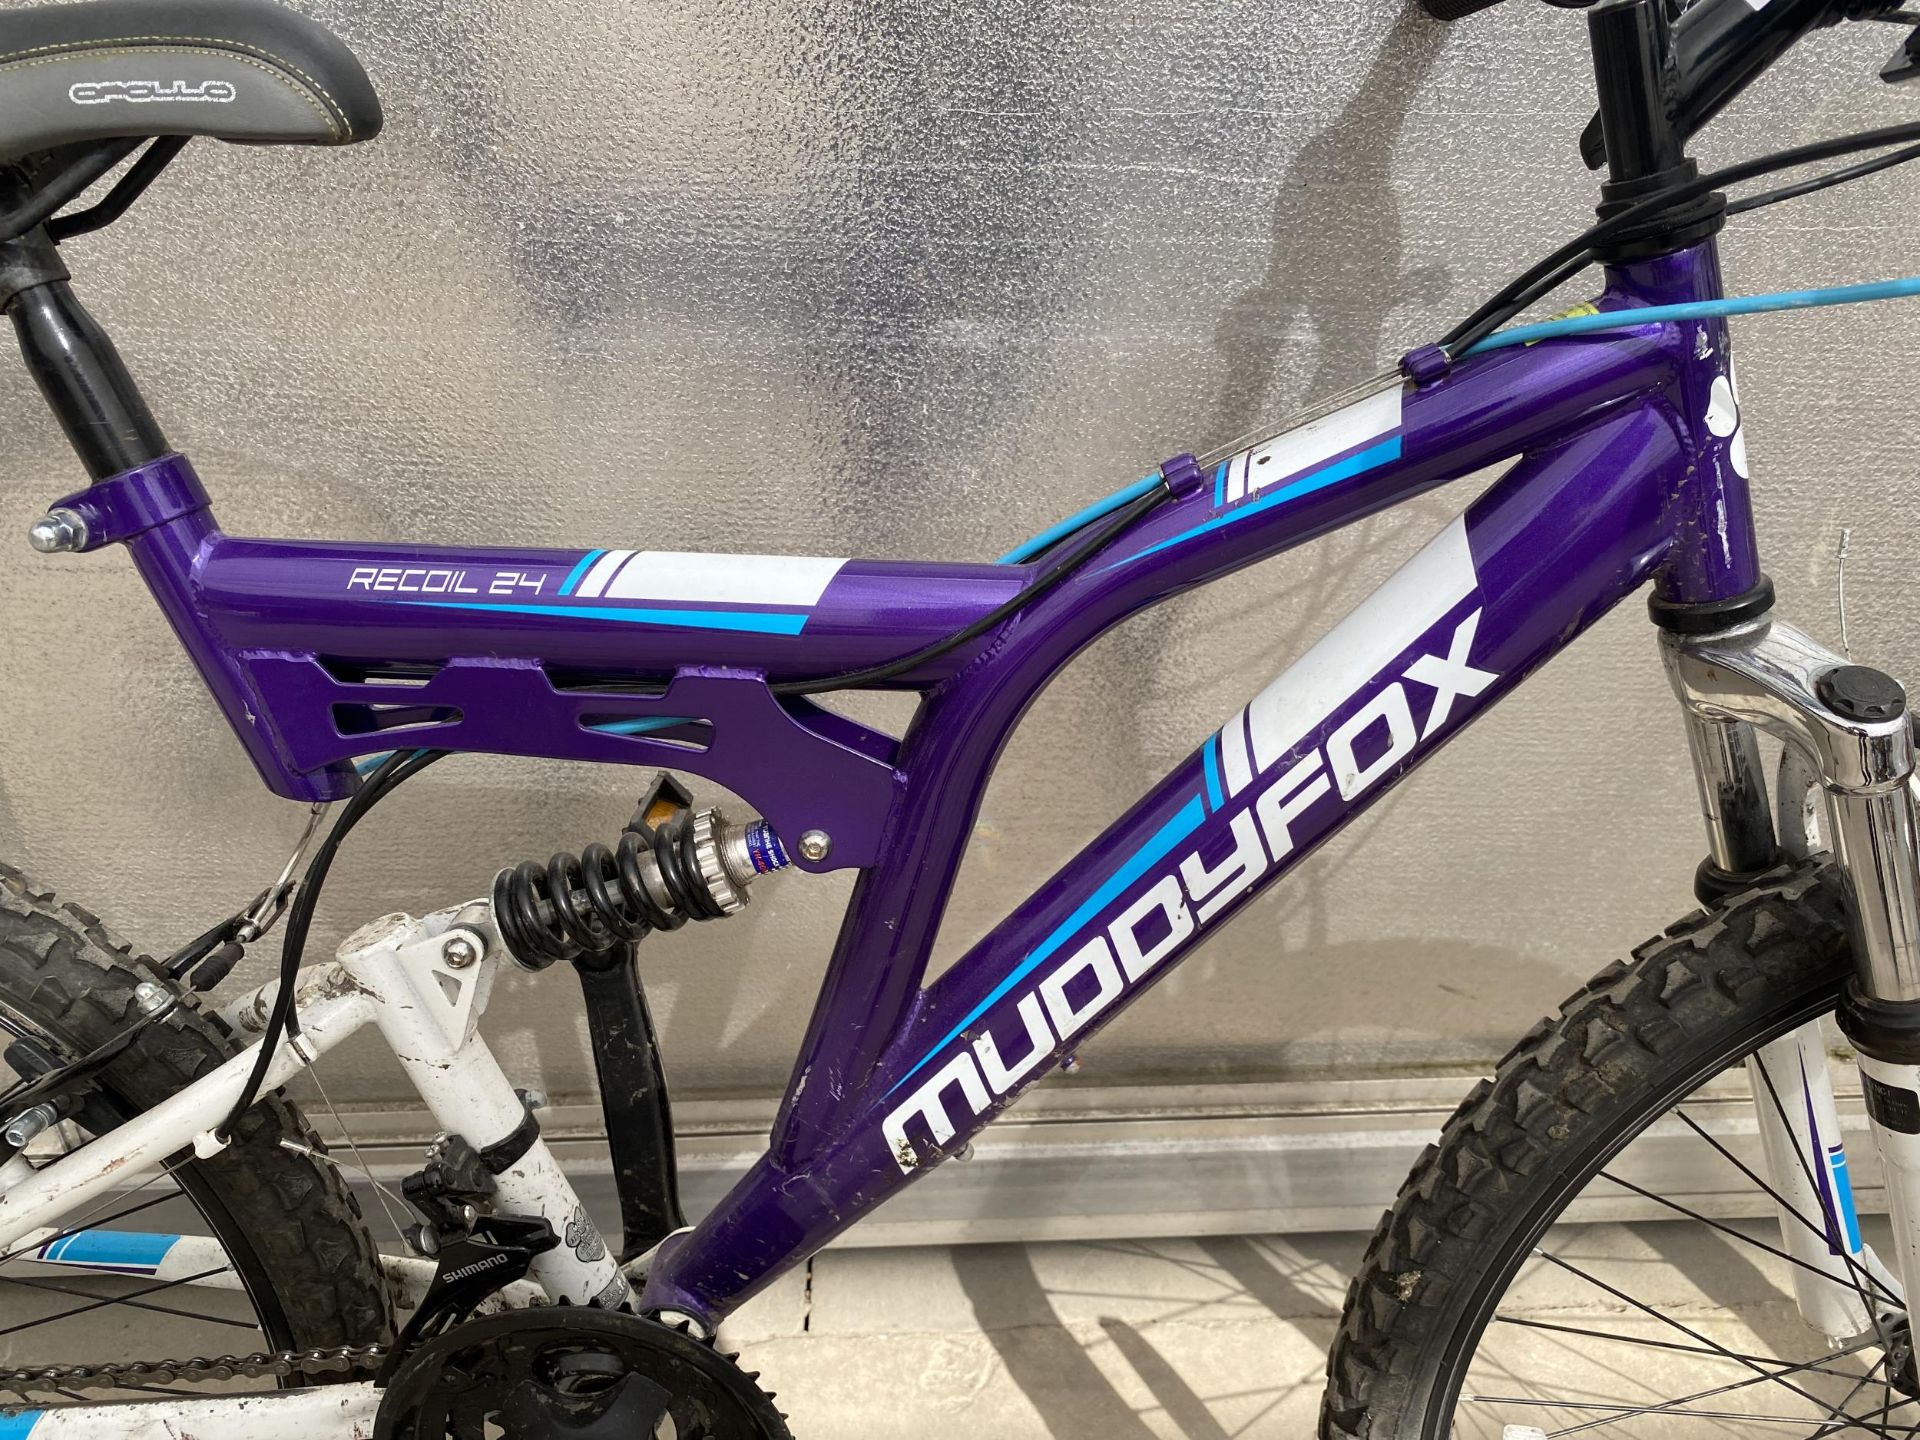 A MUDDYFOX RECOIL 24 BIKE WITH SHIMANO GEAR SYSTEM - Image 2 of 3